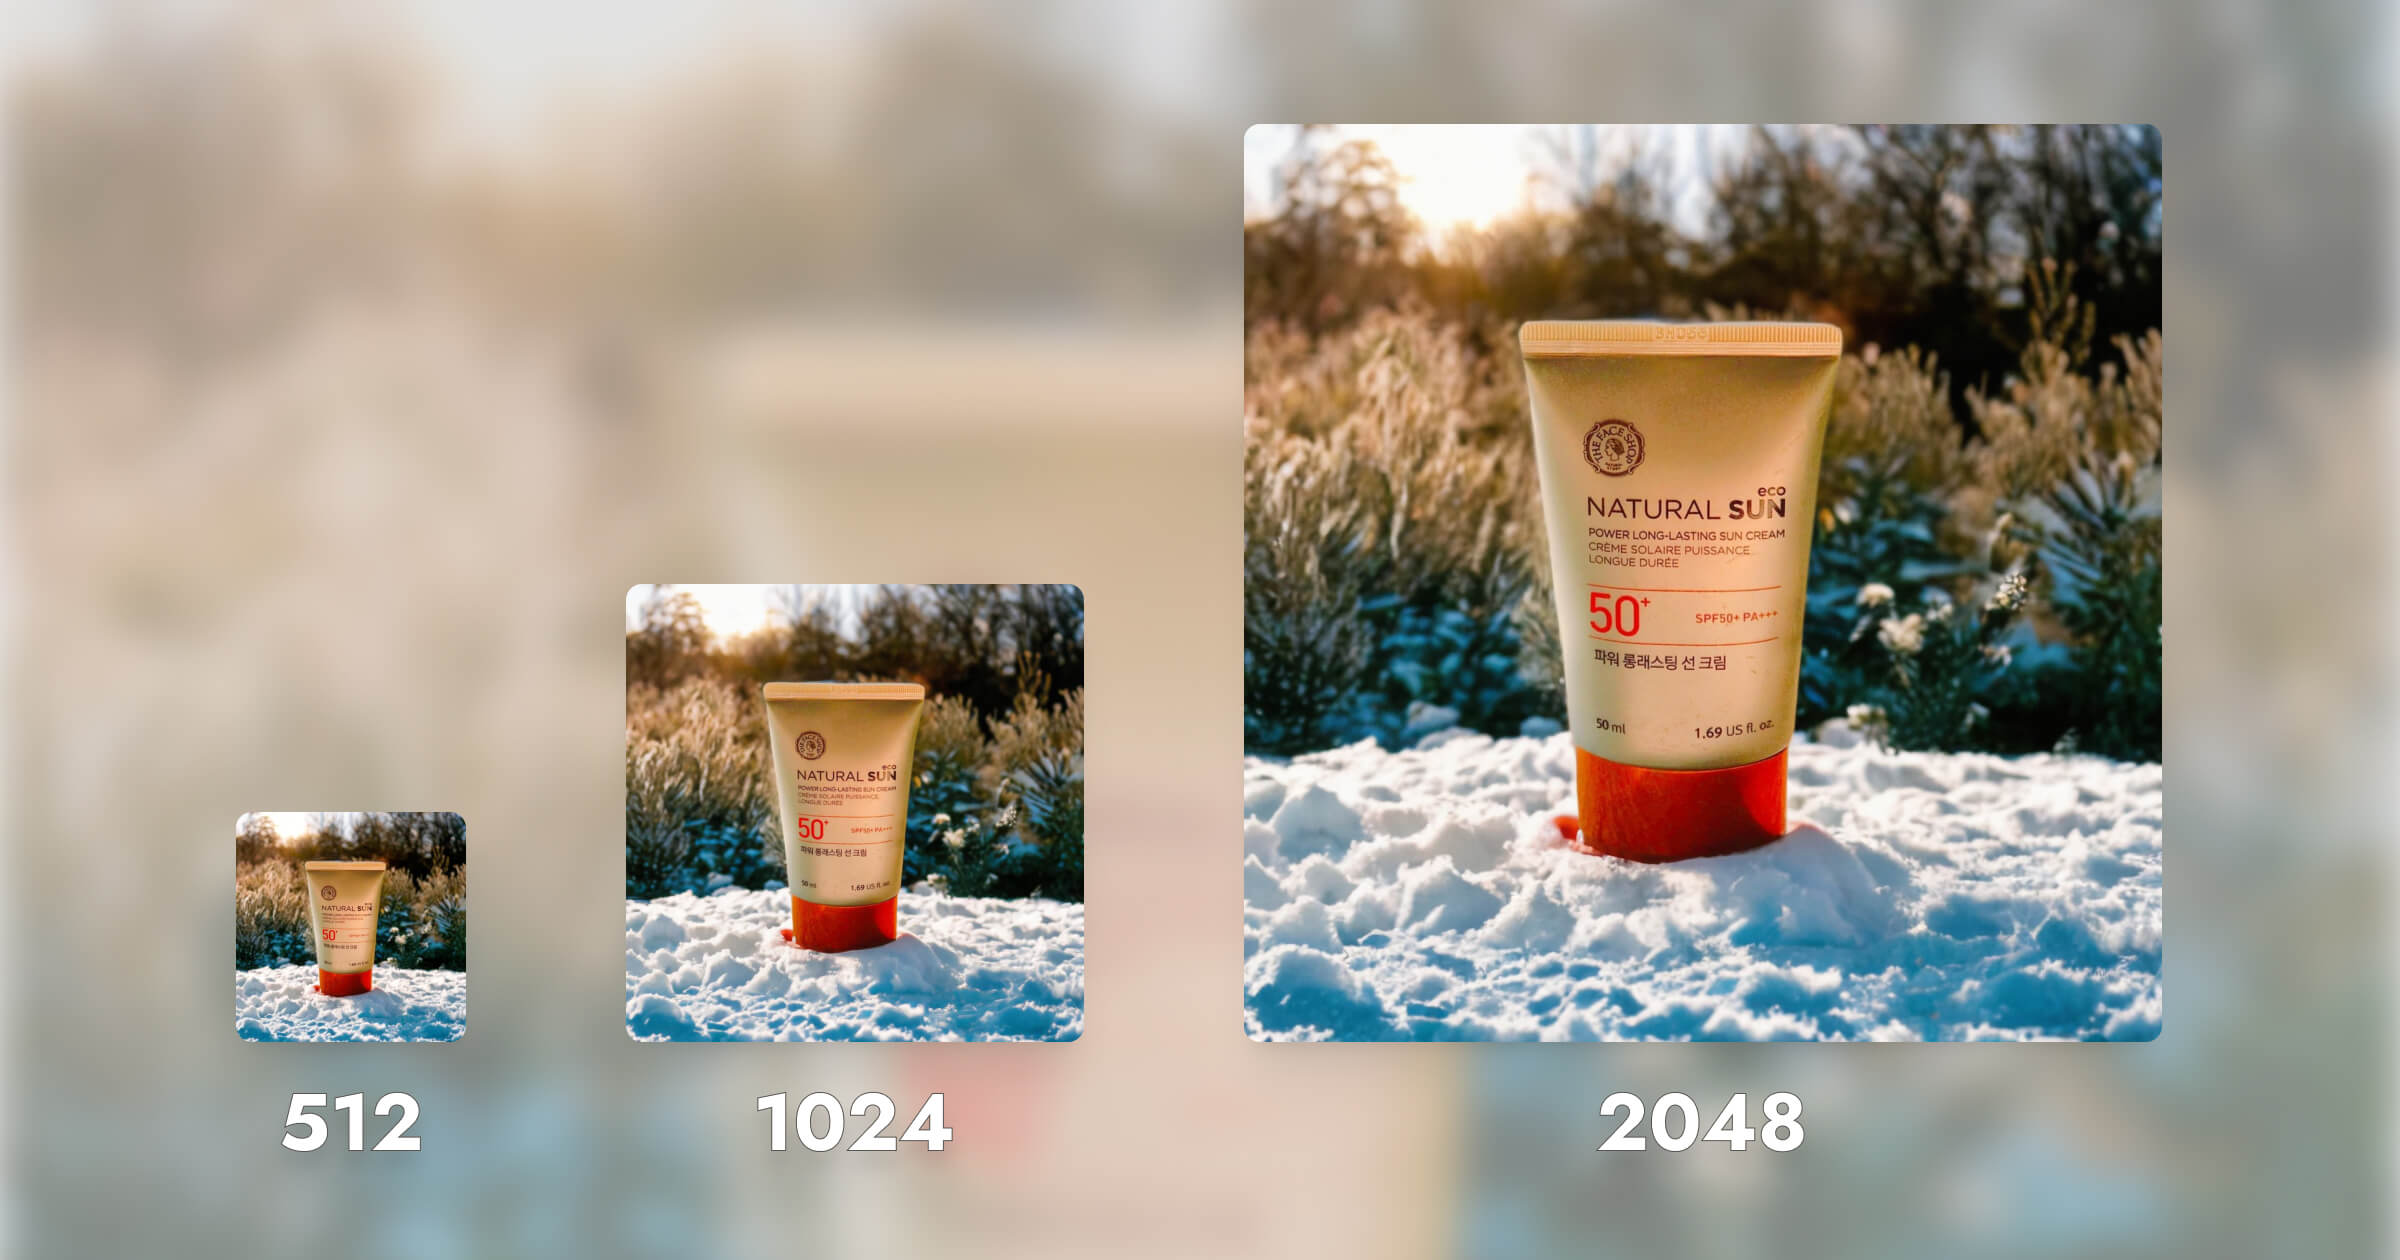 512, 1024, 2048 product images by Pebblely